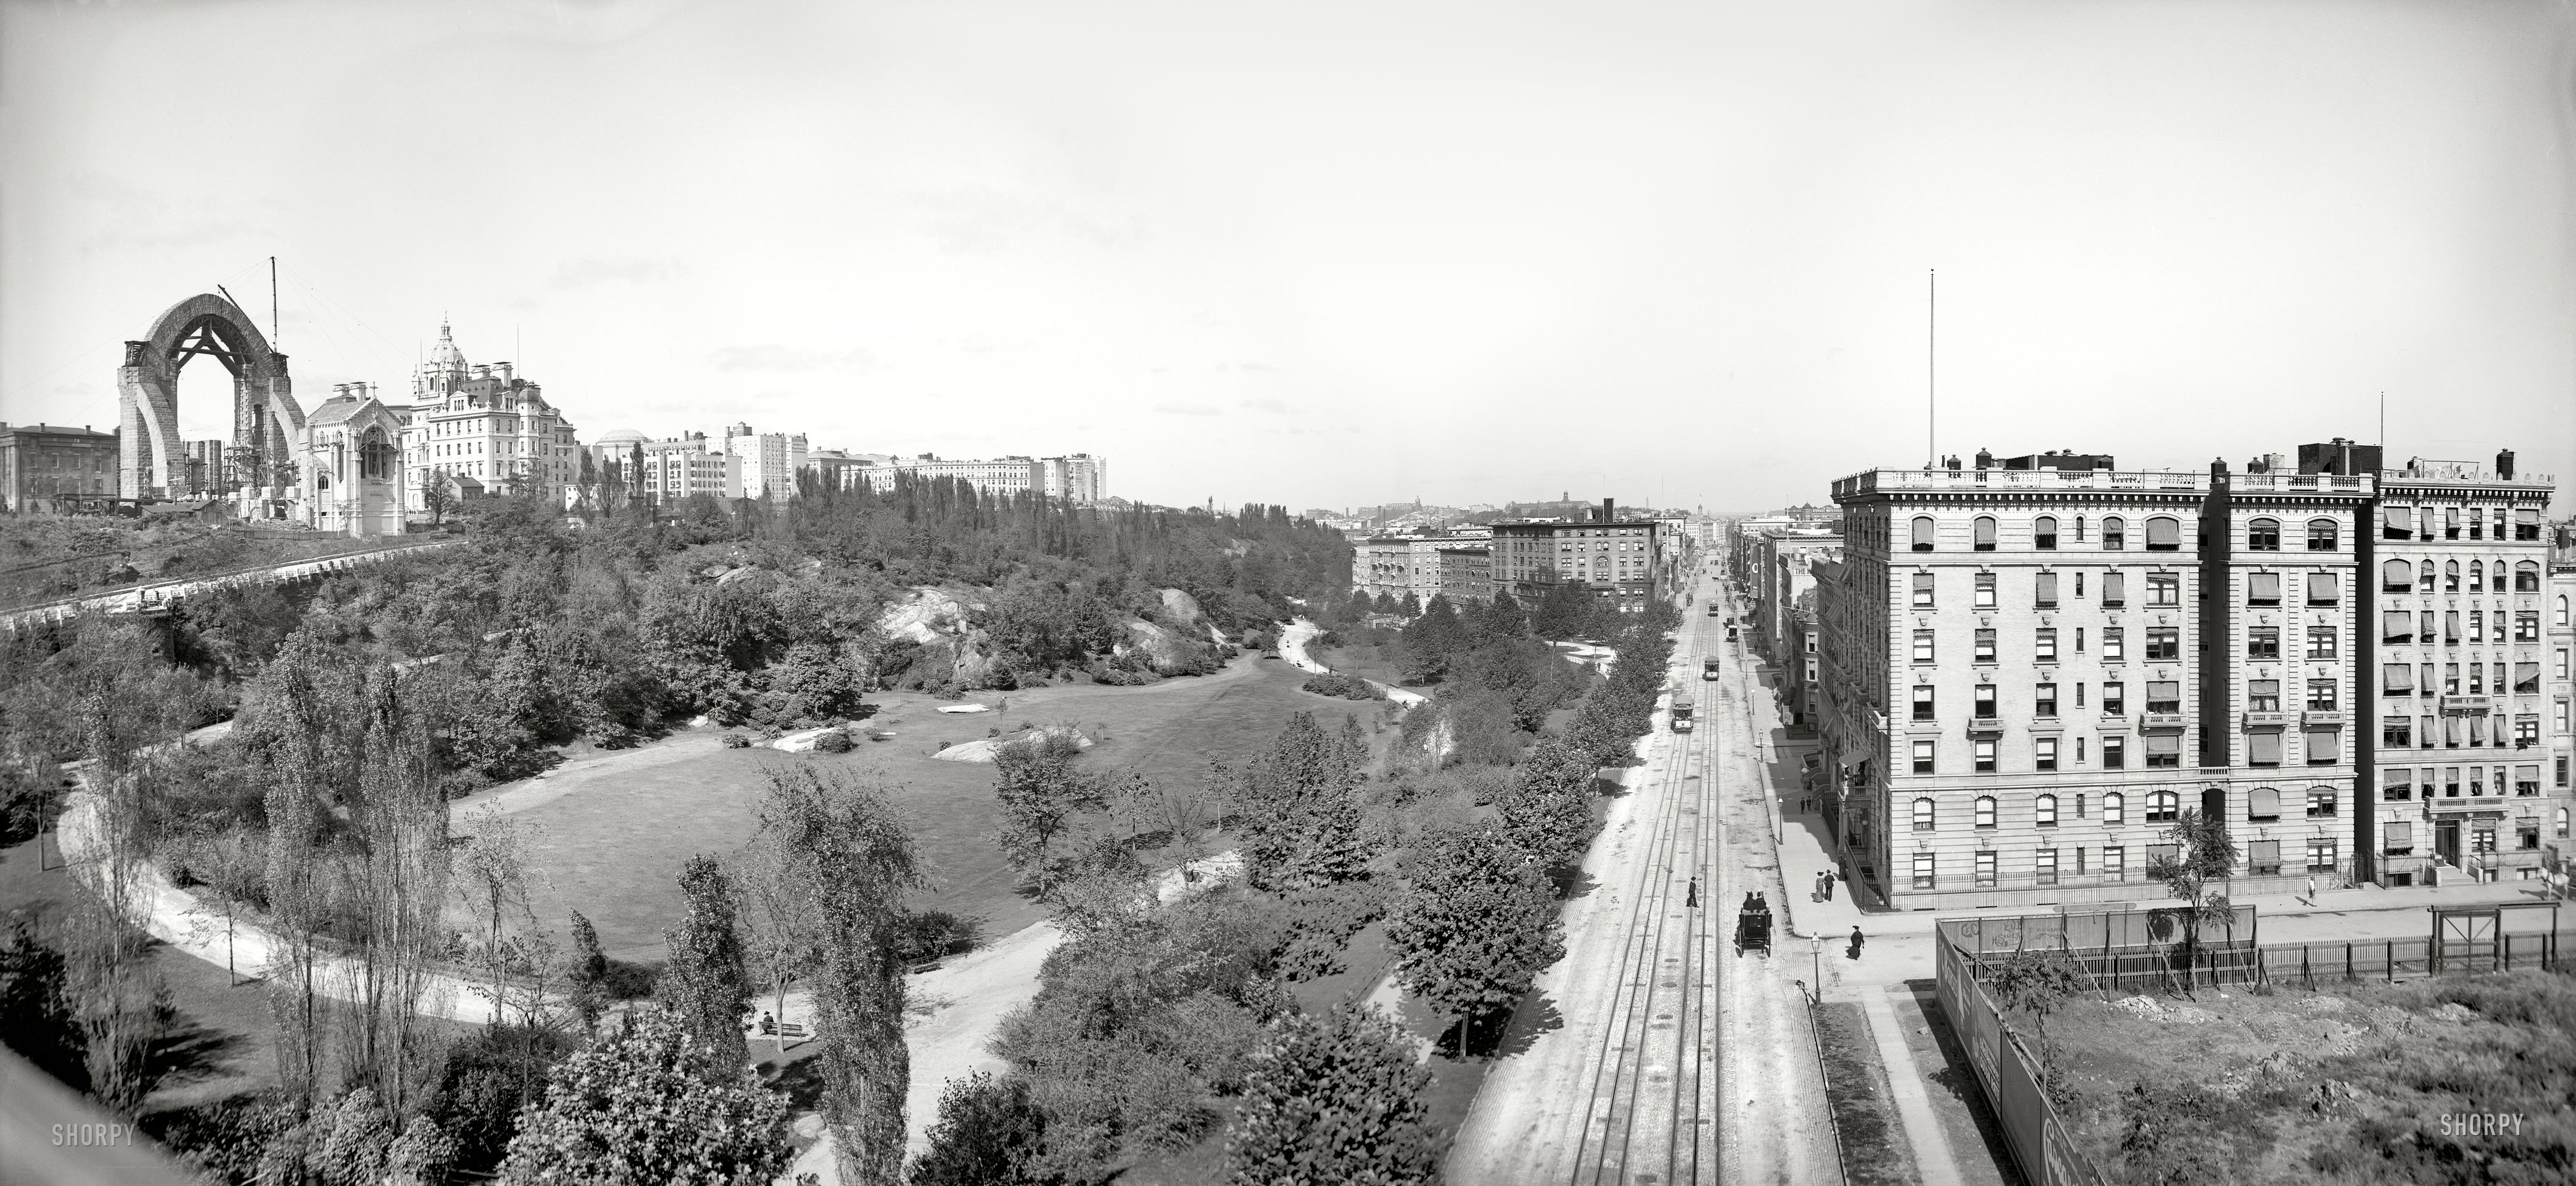 New York circa 1904. "Morningside Park, Cathedral of St. John the Divine under construction." Panorama made from two 8x10 glass negatives. View full size.